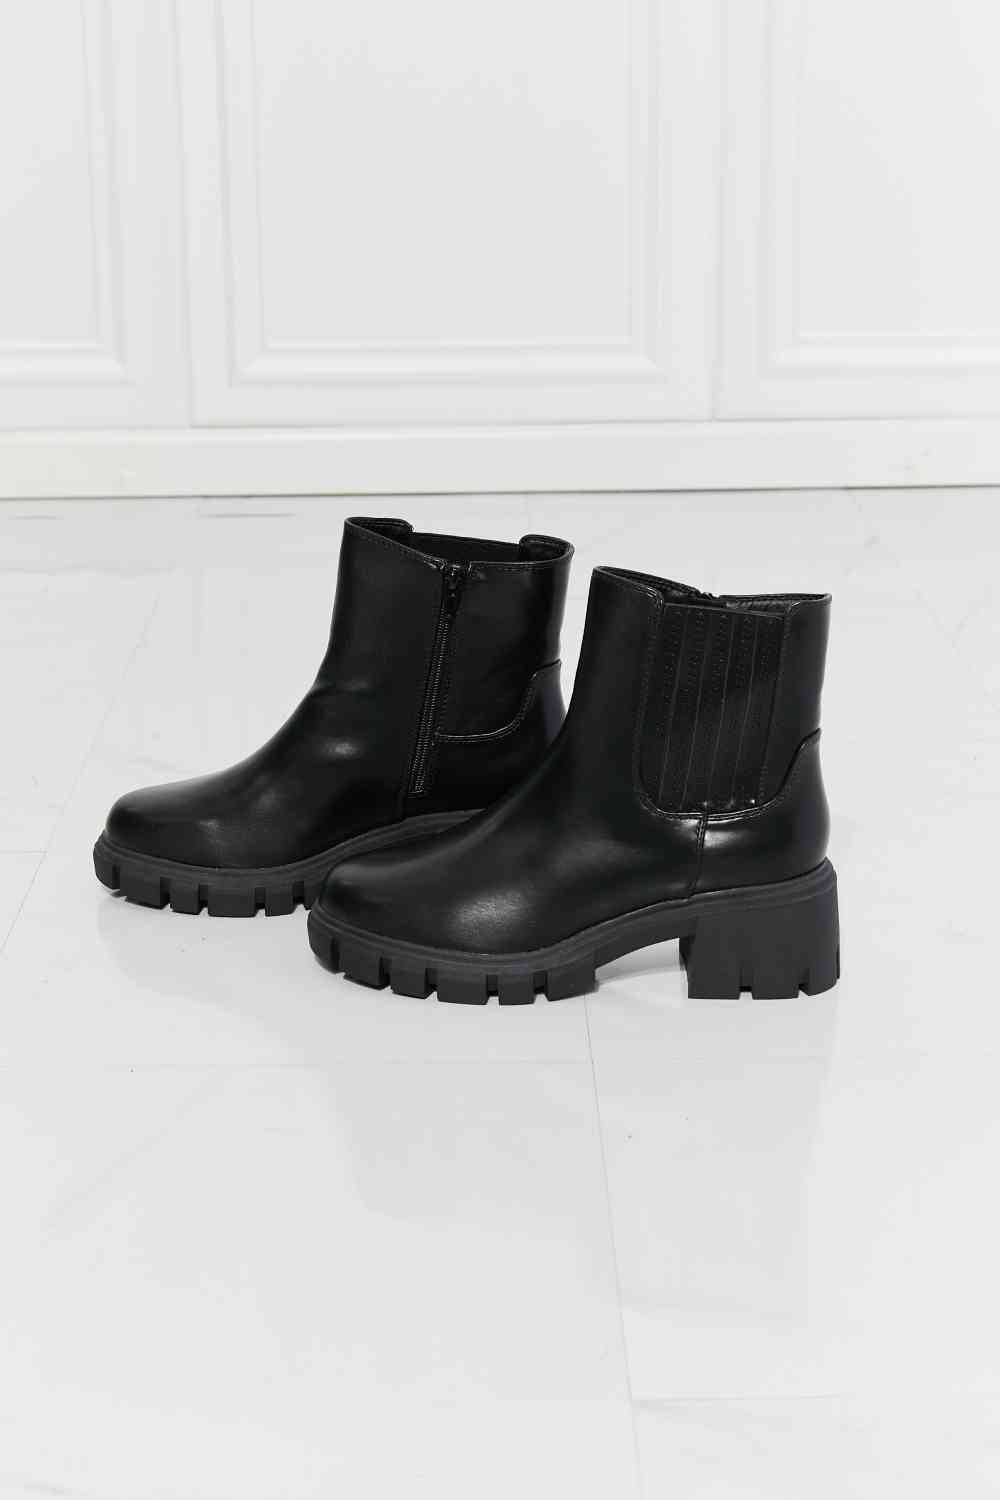 MMShoes What It Takes Lug Sole Chelsea Boots in Black